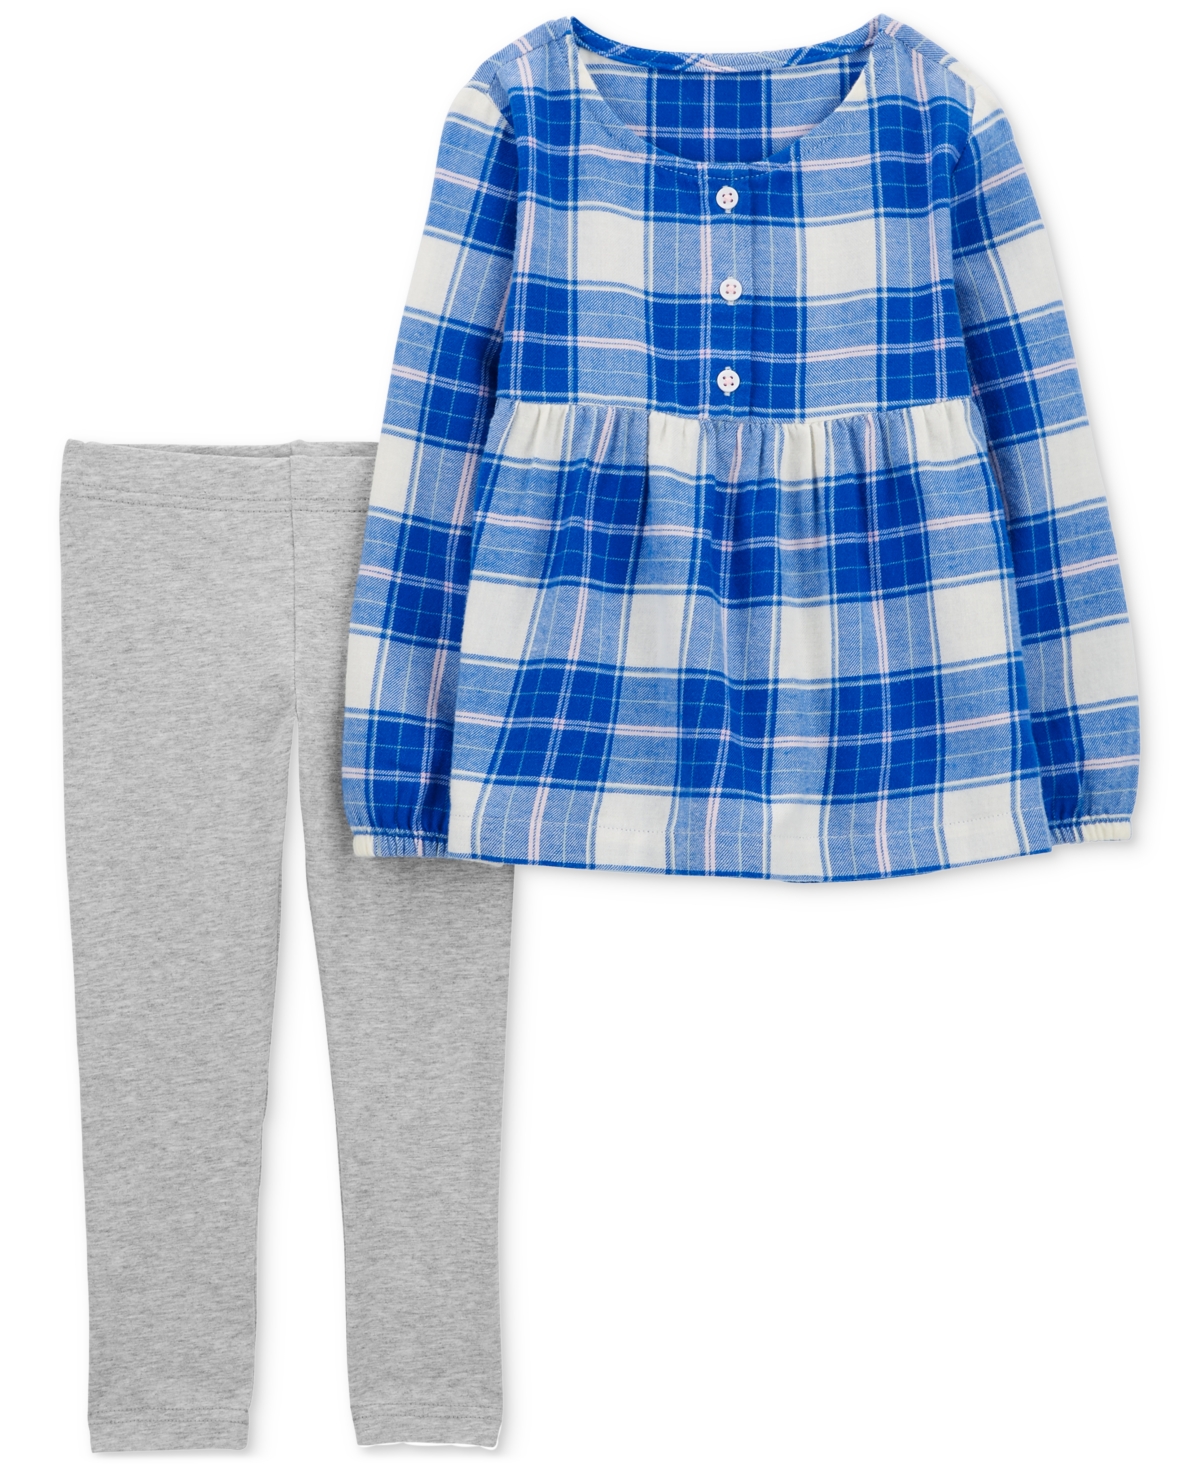 Carter's Baby Girls Plaid Peplum Top And Leggings, 2 Piece Set In Blue,gray